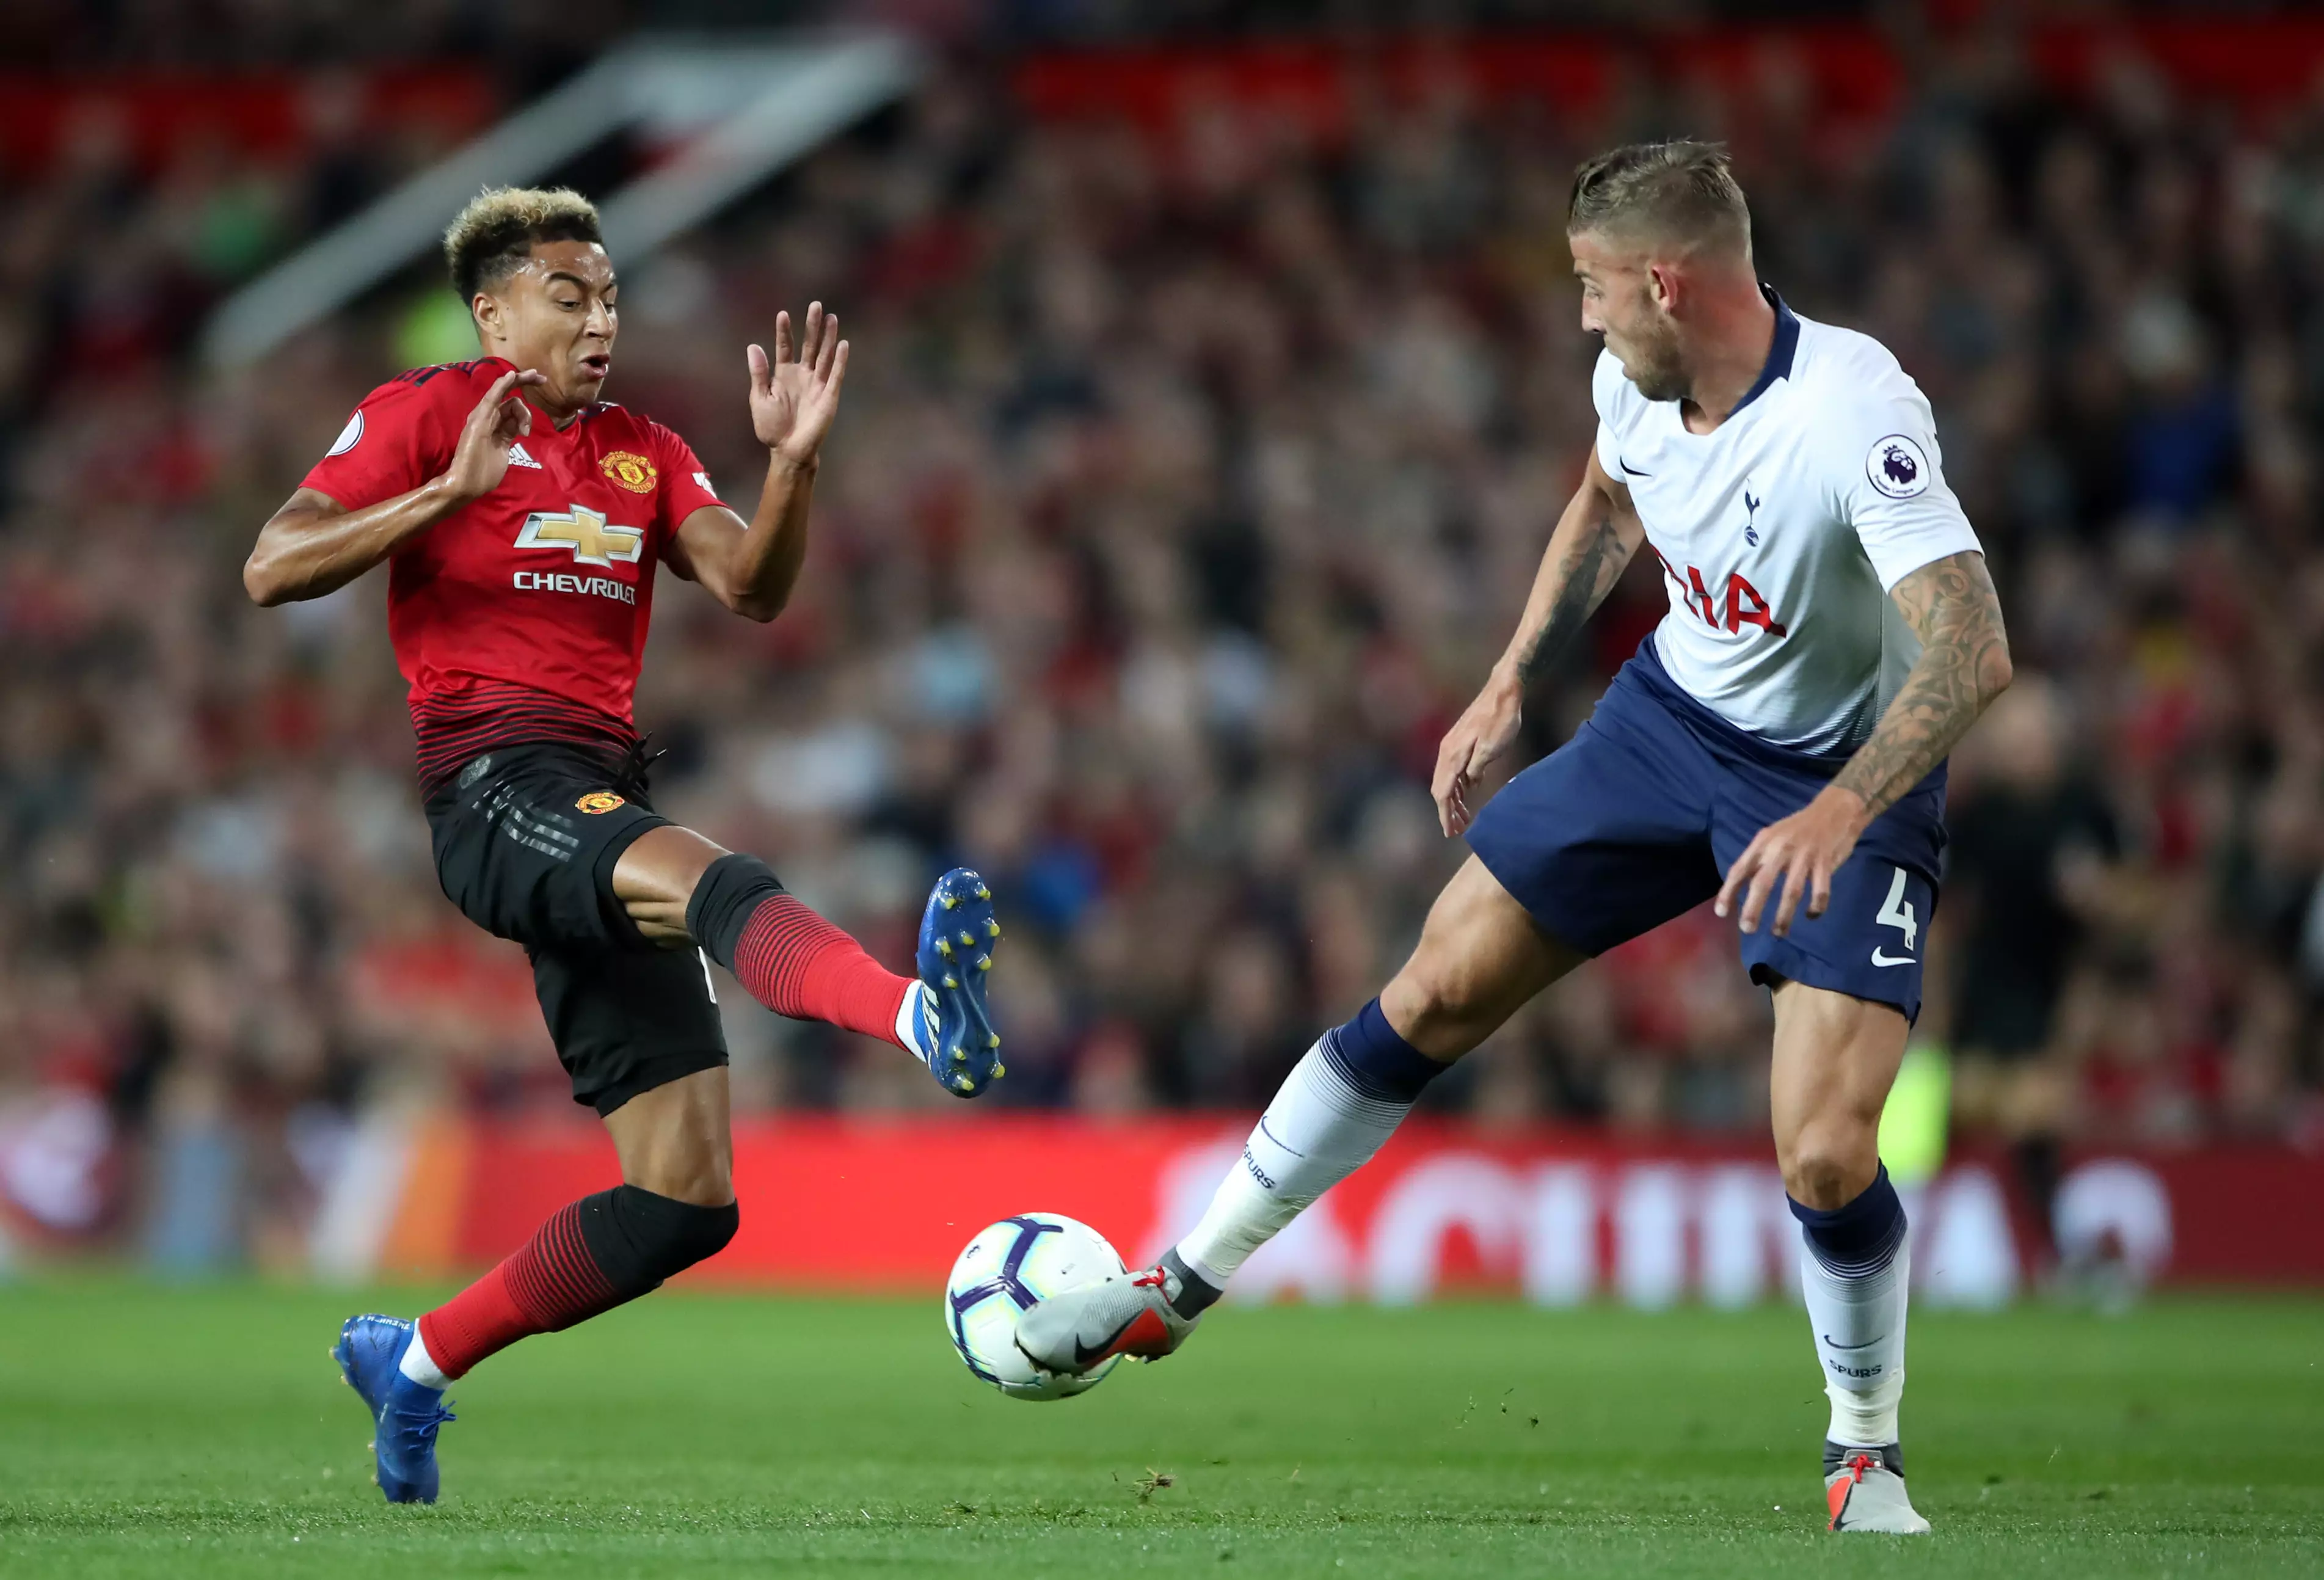 Alderweireld stops Jesse Lingard in the recent game. Image: PA Images